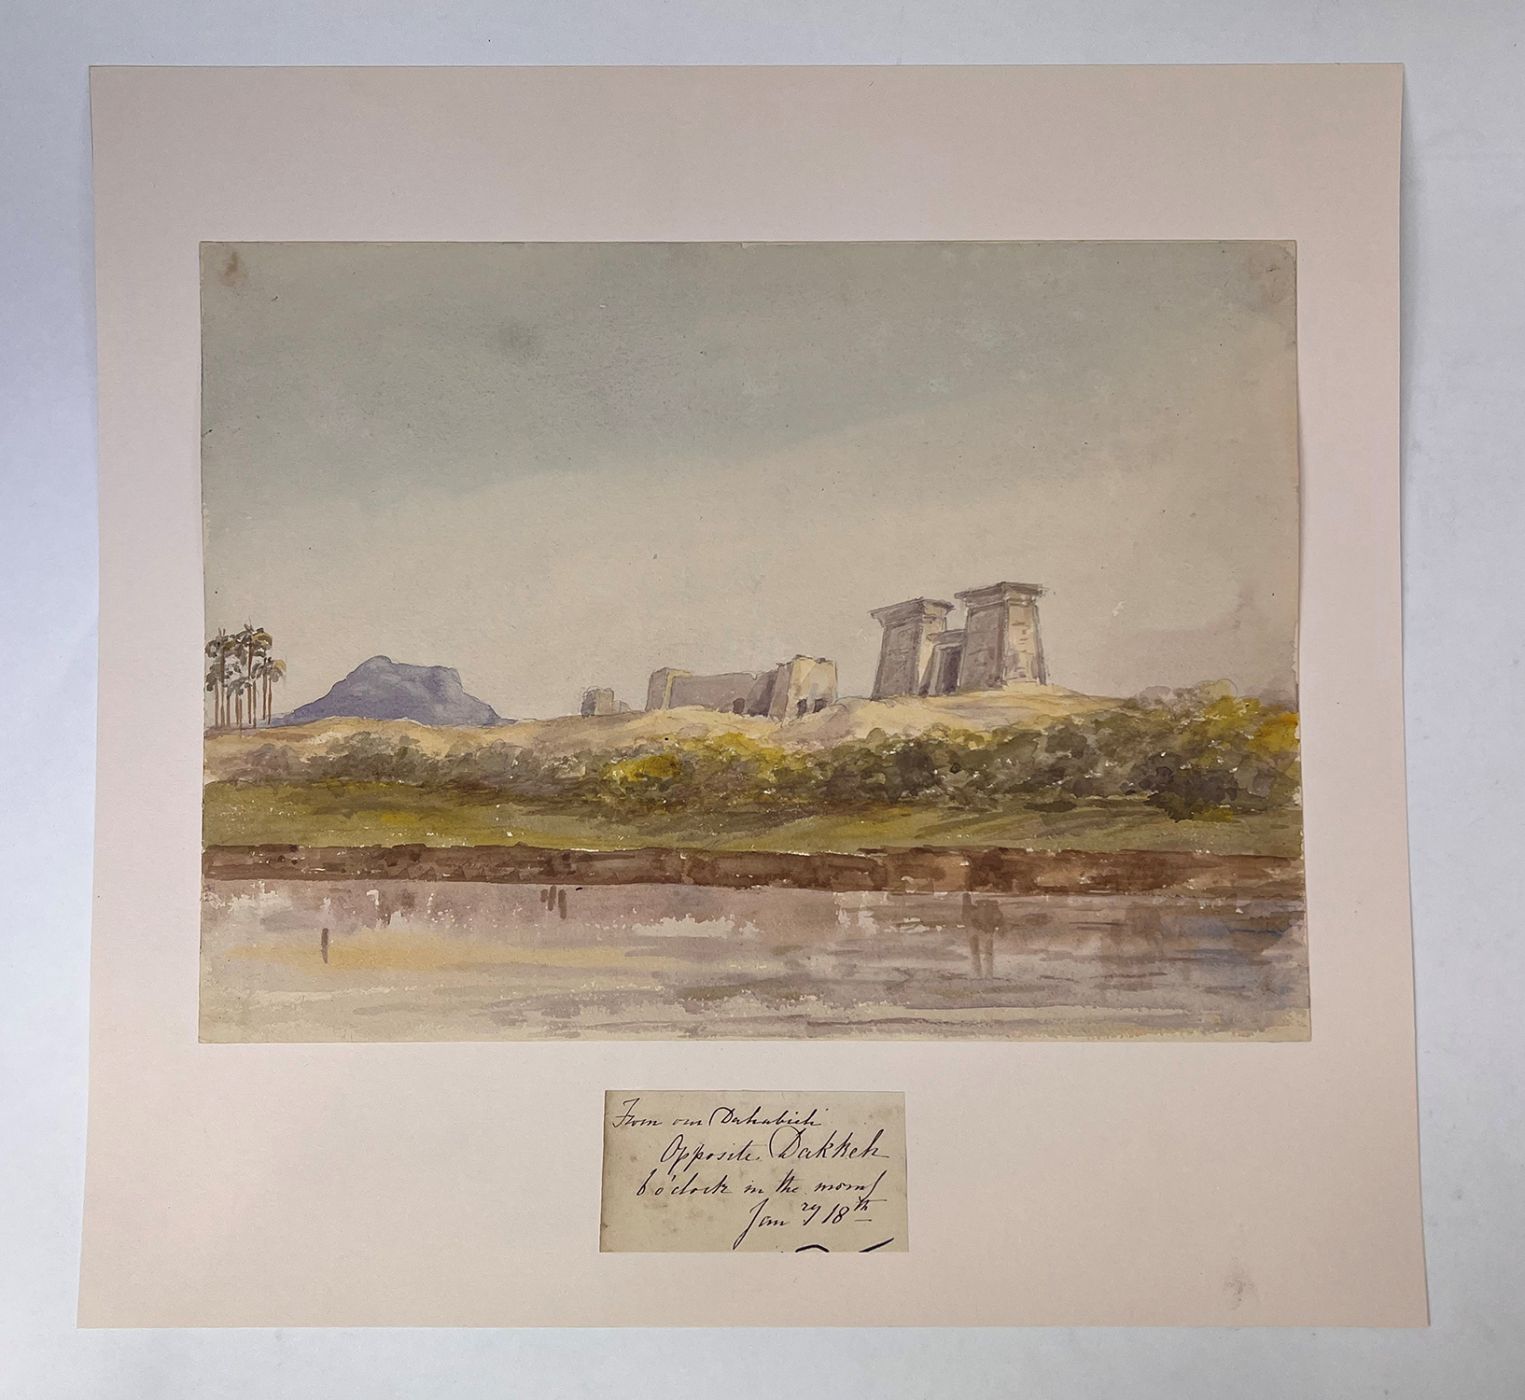 A FINE COLLECTION OF TWENTY-SEVEN EARLY WATERCOLOUR VIEWS OF THE NILE, PRODUCED DURING A WINTER CRUISE IN 1864-65, DEPICTING THE ANCIENT SITES AND LANDSCAPES OF UPPER EGYPT, NUBIA, AND THE SECOND CATARACT -  image 7